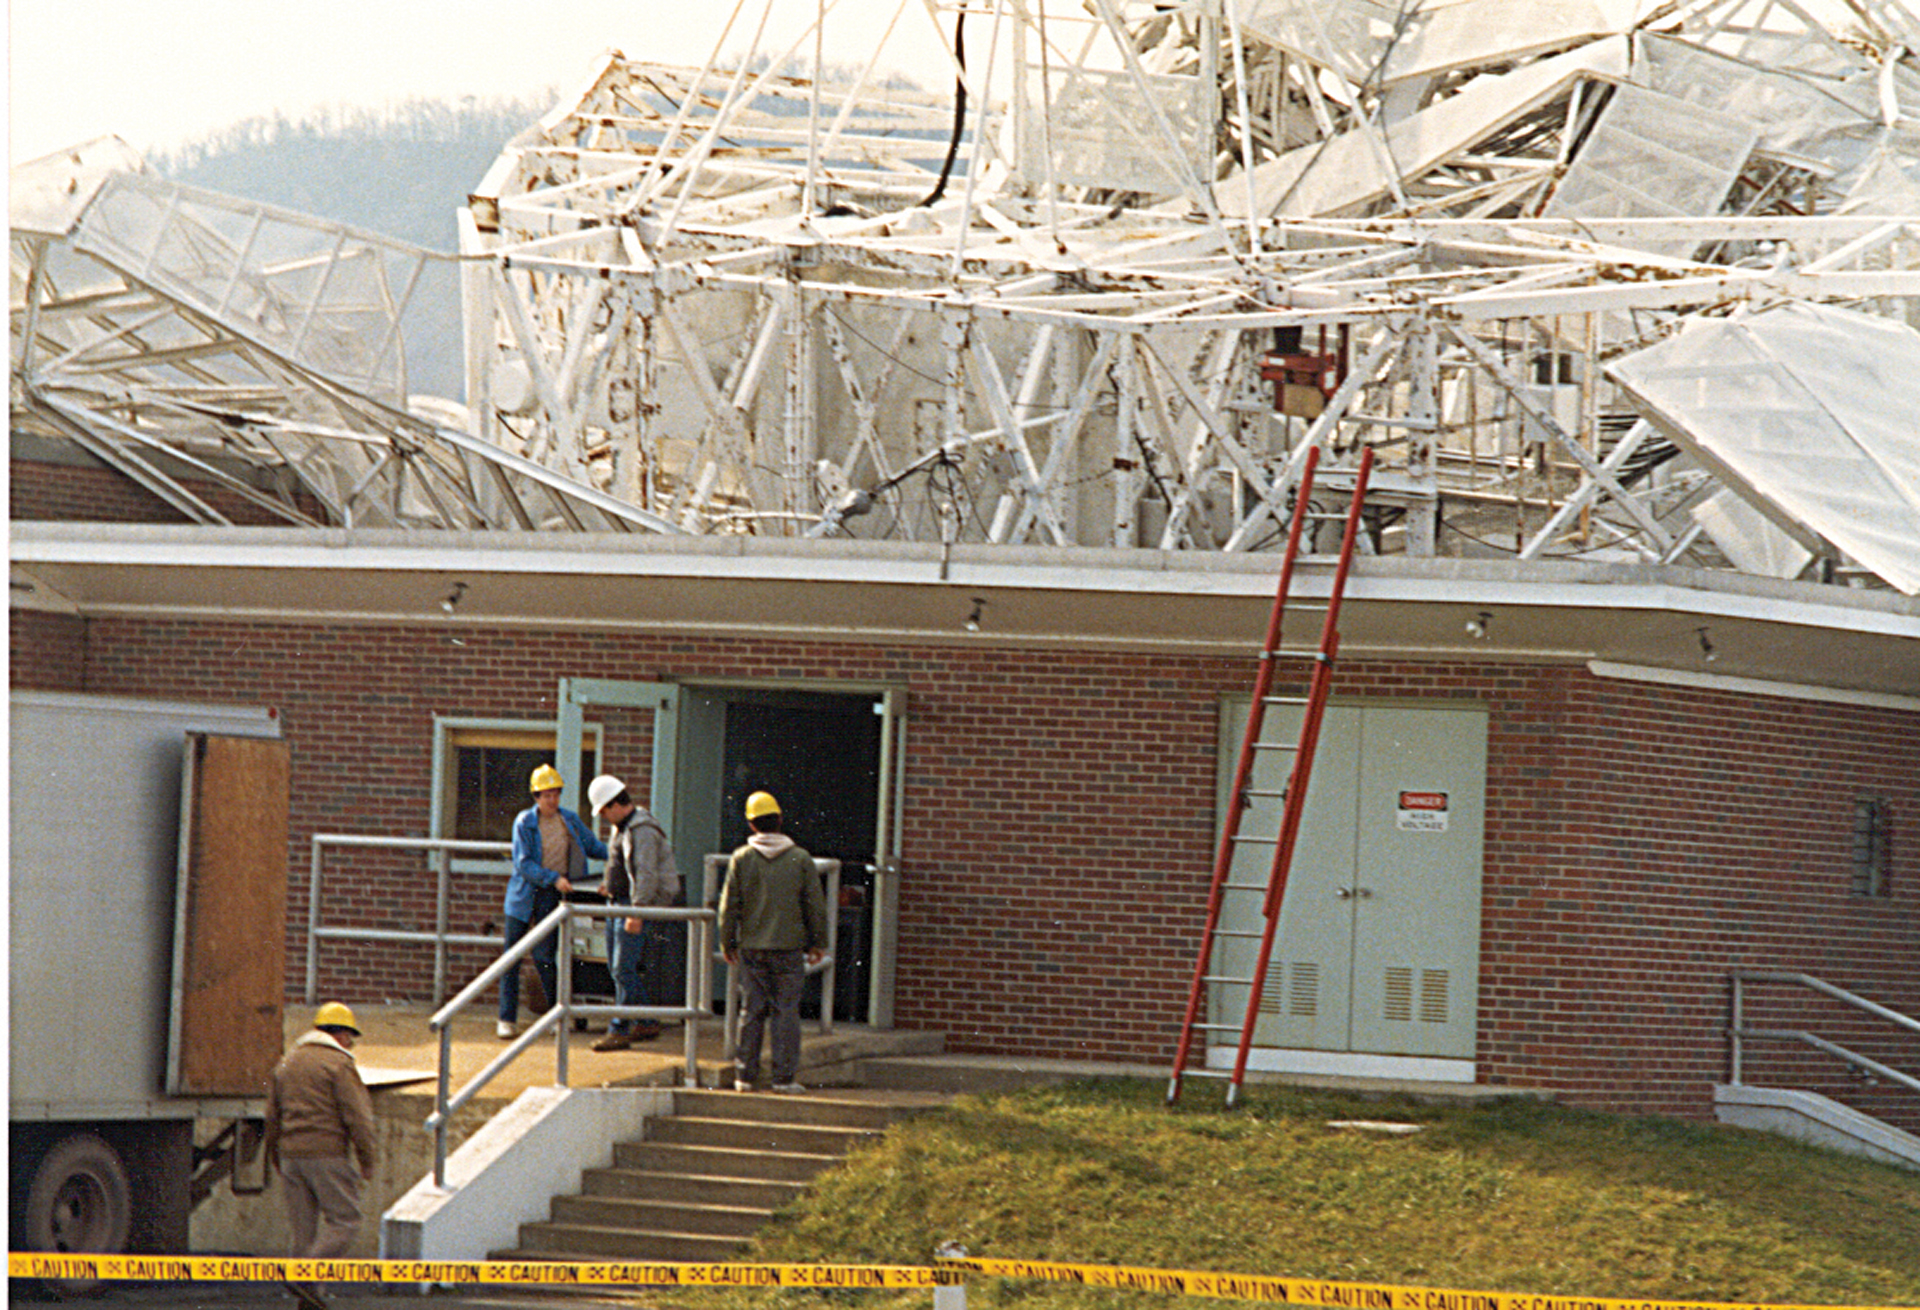 Salvaging 300-foot telescope equipment from Control Building